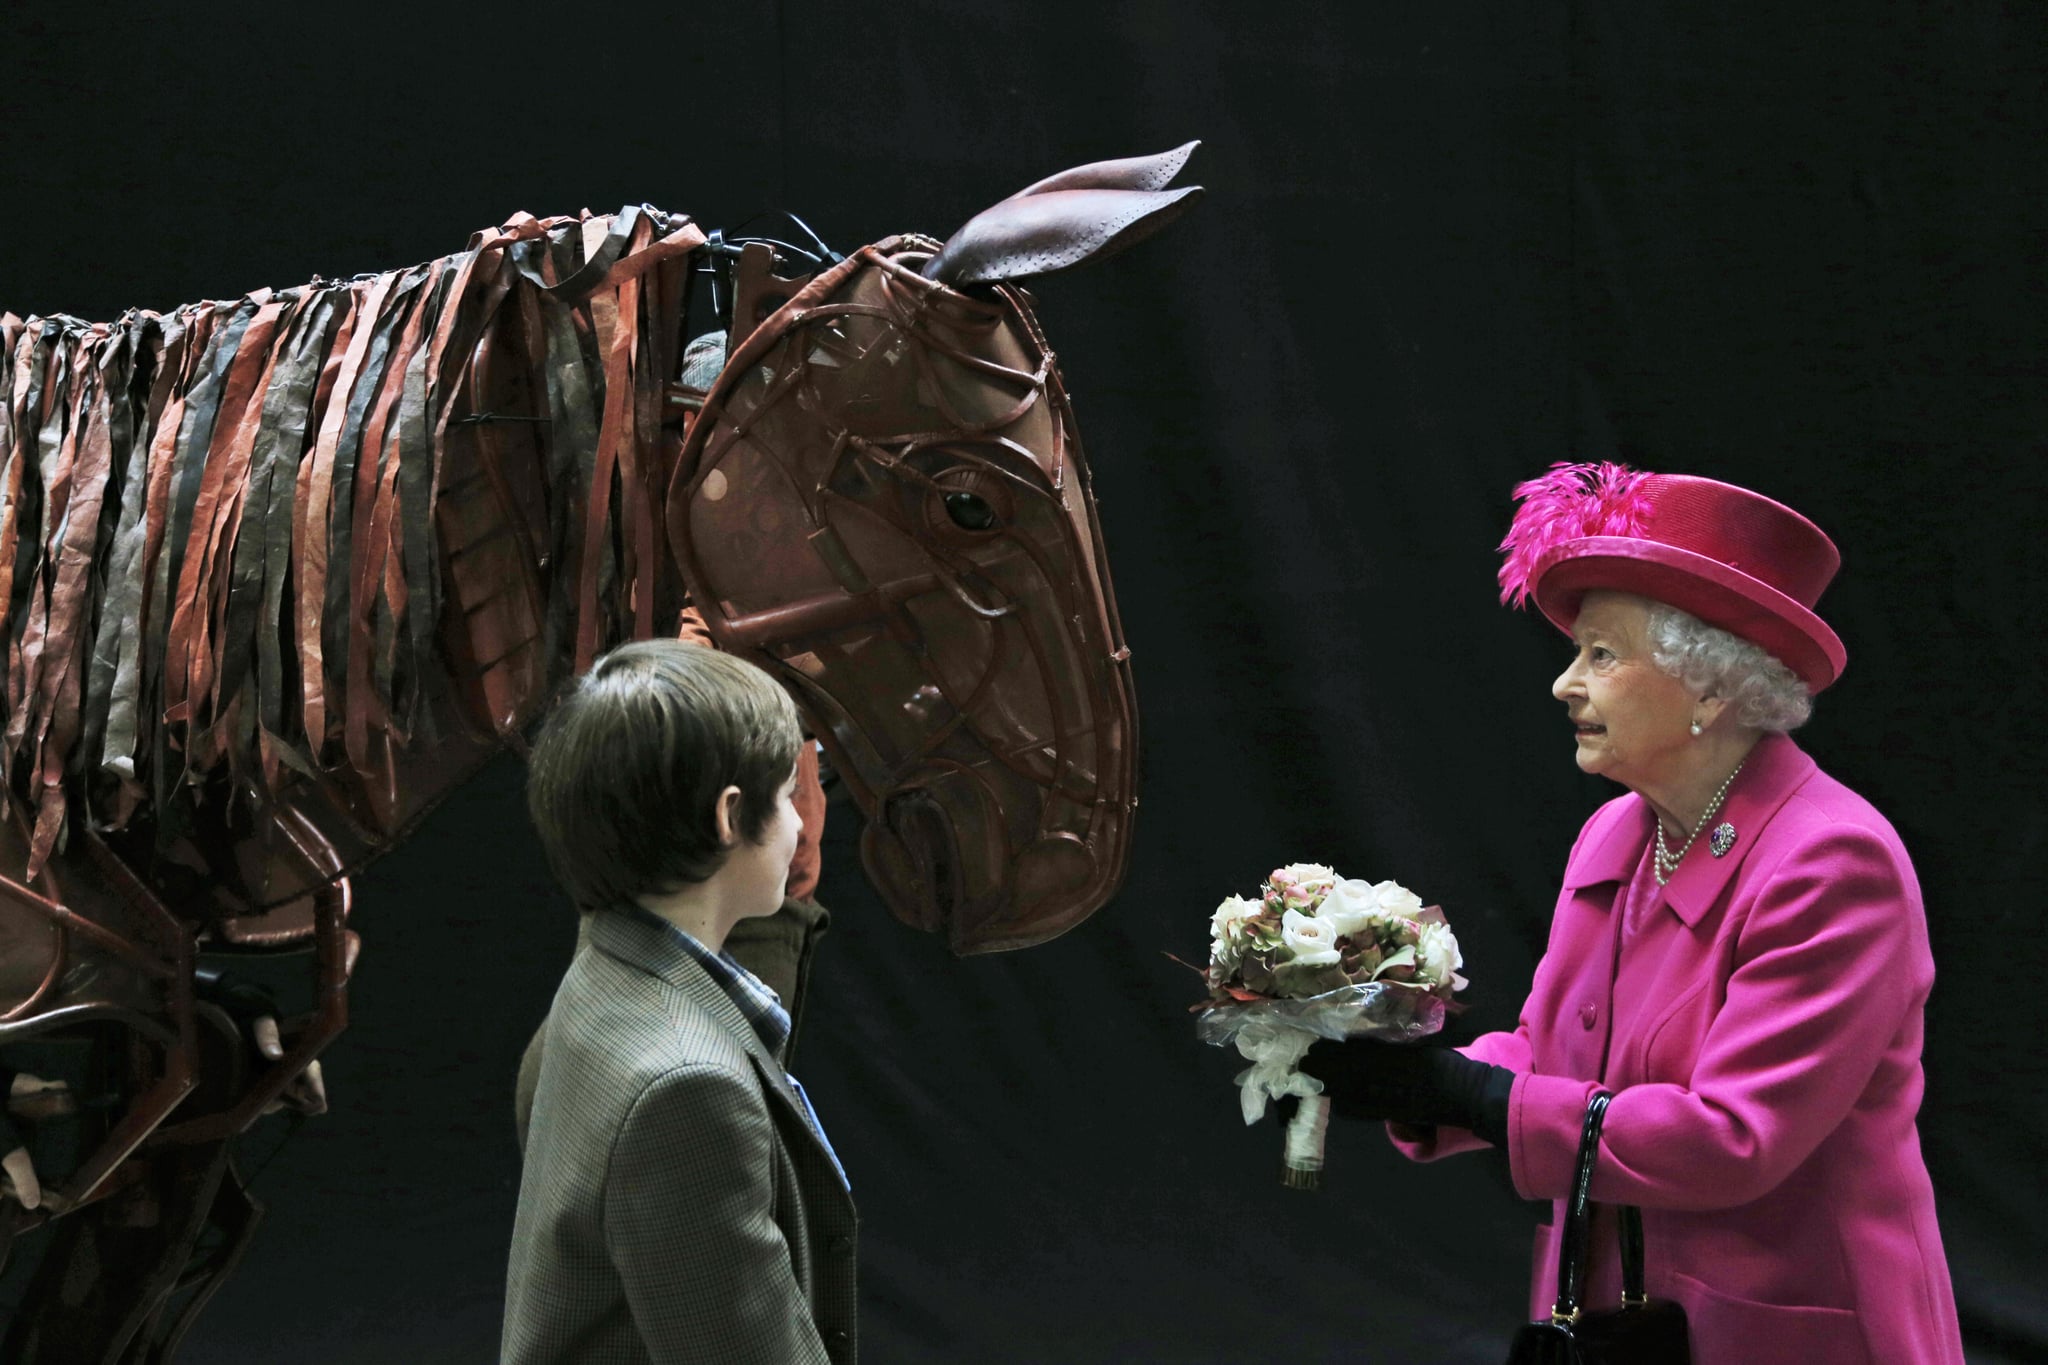 Queen Elizabeth II attends "War Horse" at the National Theatre in 2013